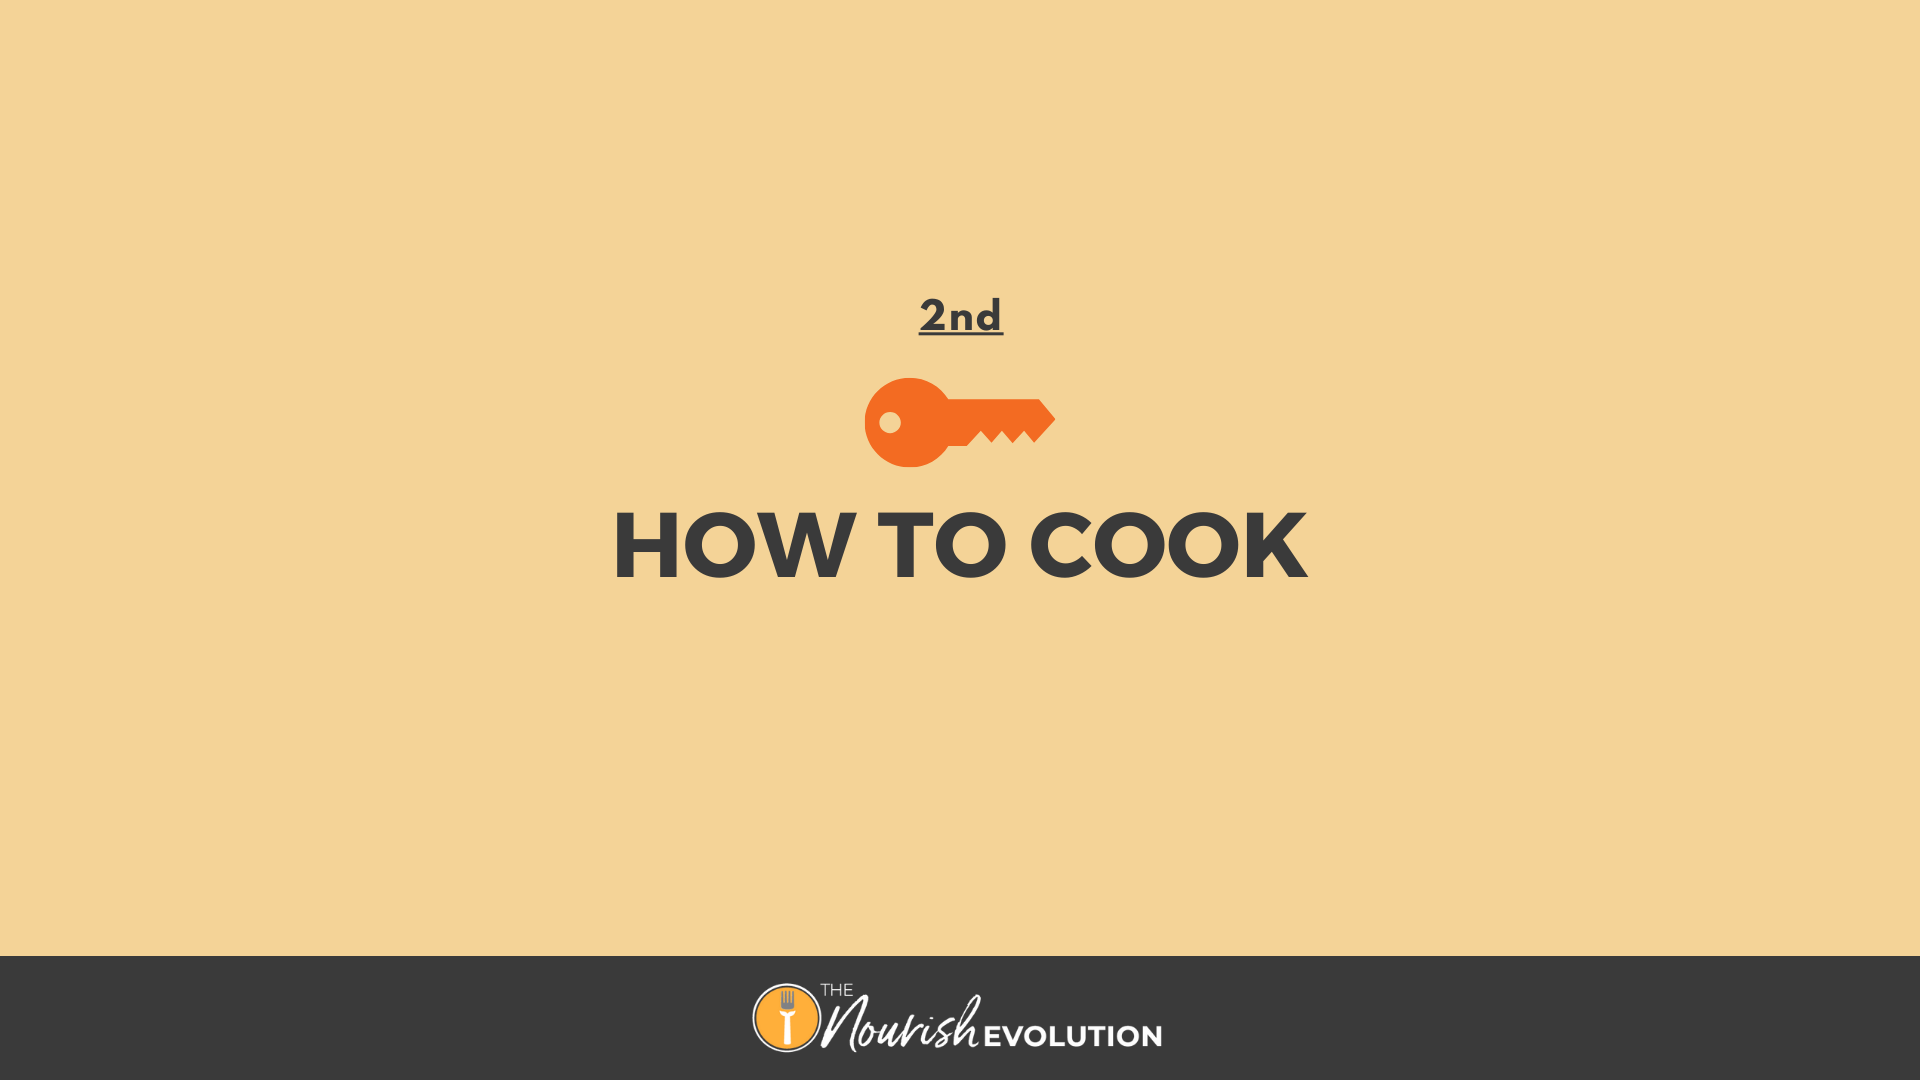 KEY #2: HOW TO COOK